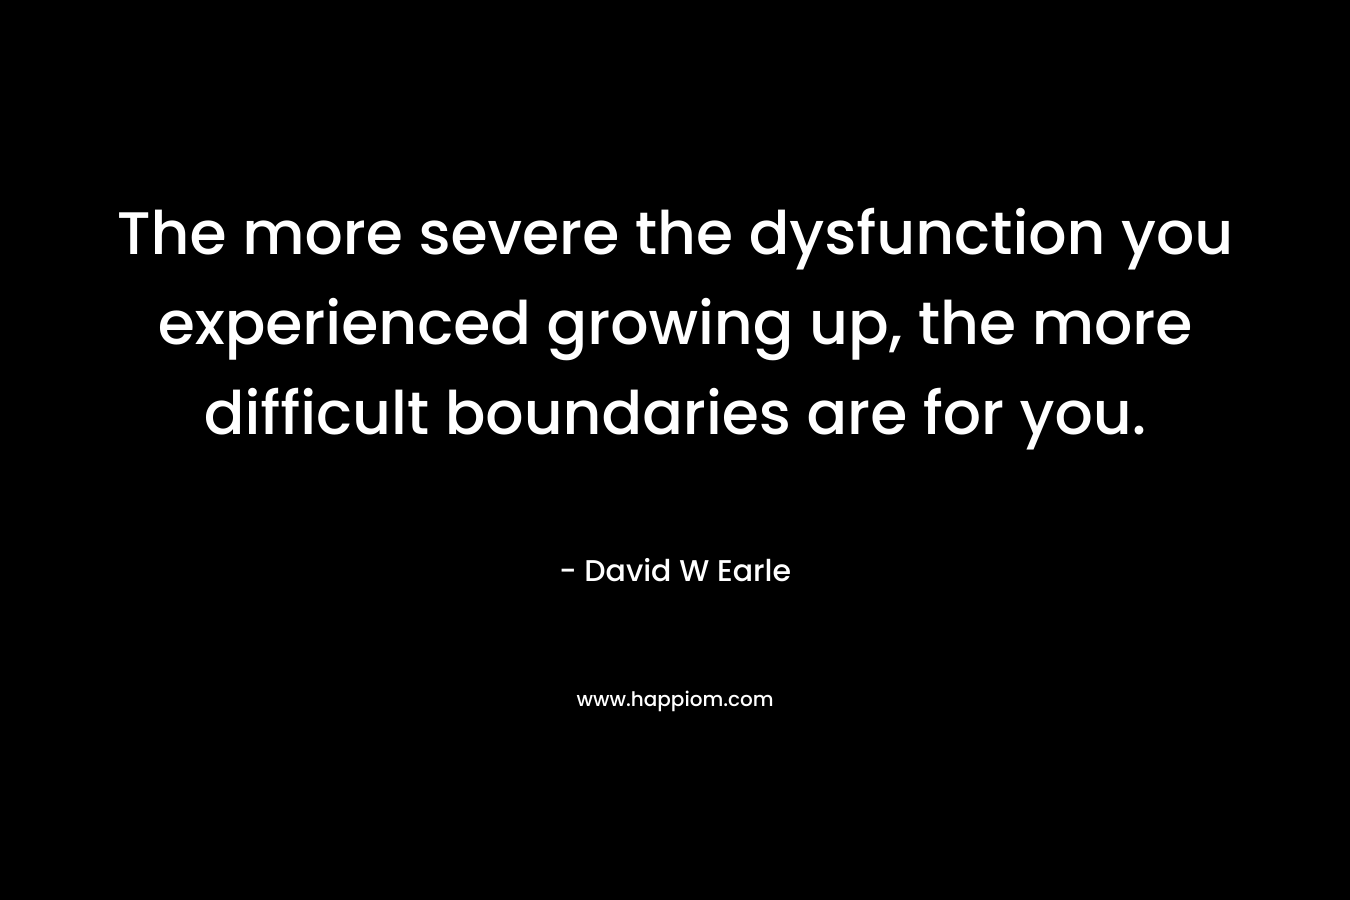 The more severe the dysfunction you experienced growing up, the more difficult boundaries are for you.